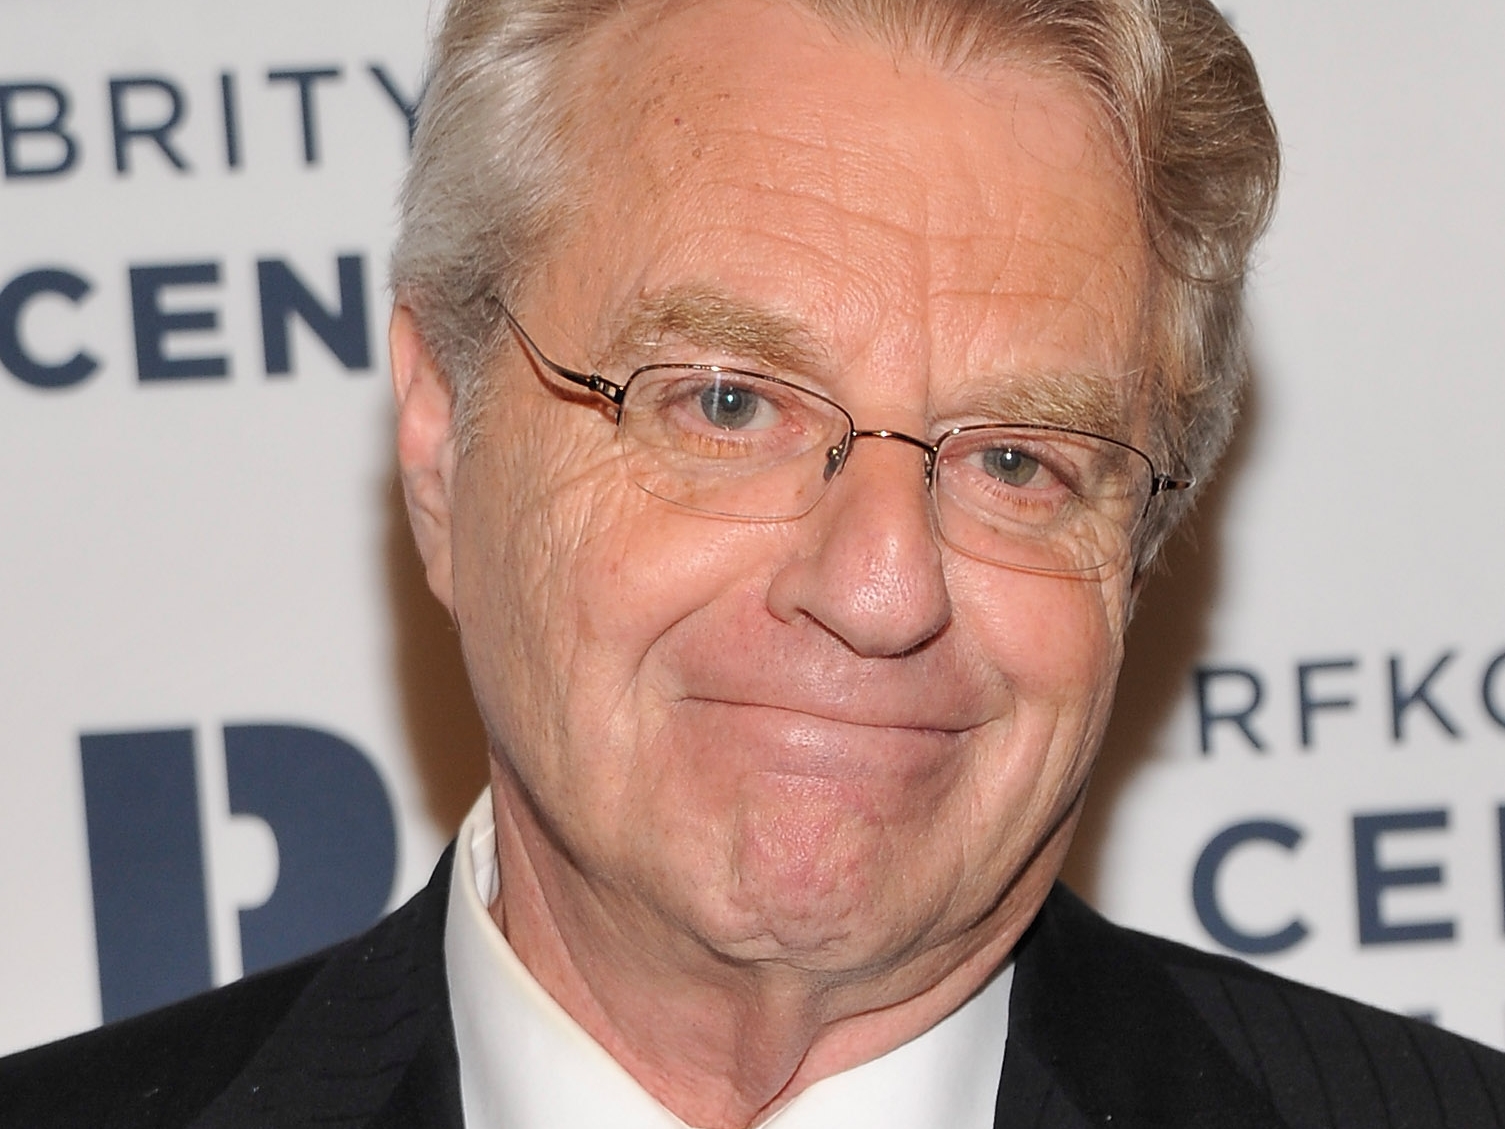 ashley mone warren recommends jerry springer x rated pic